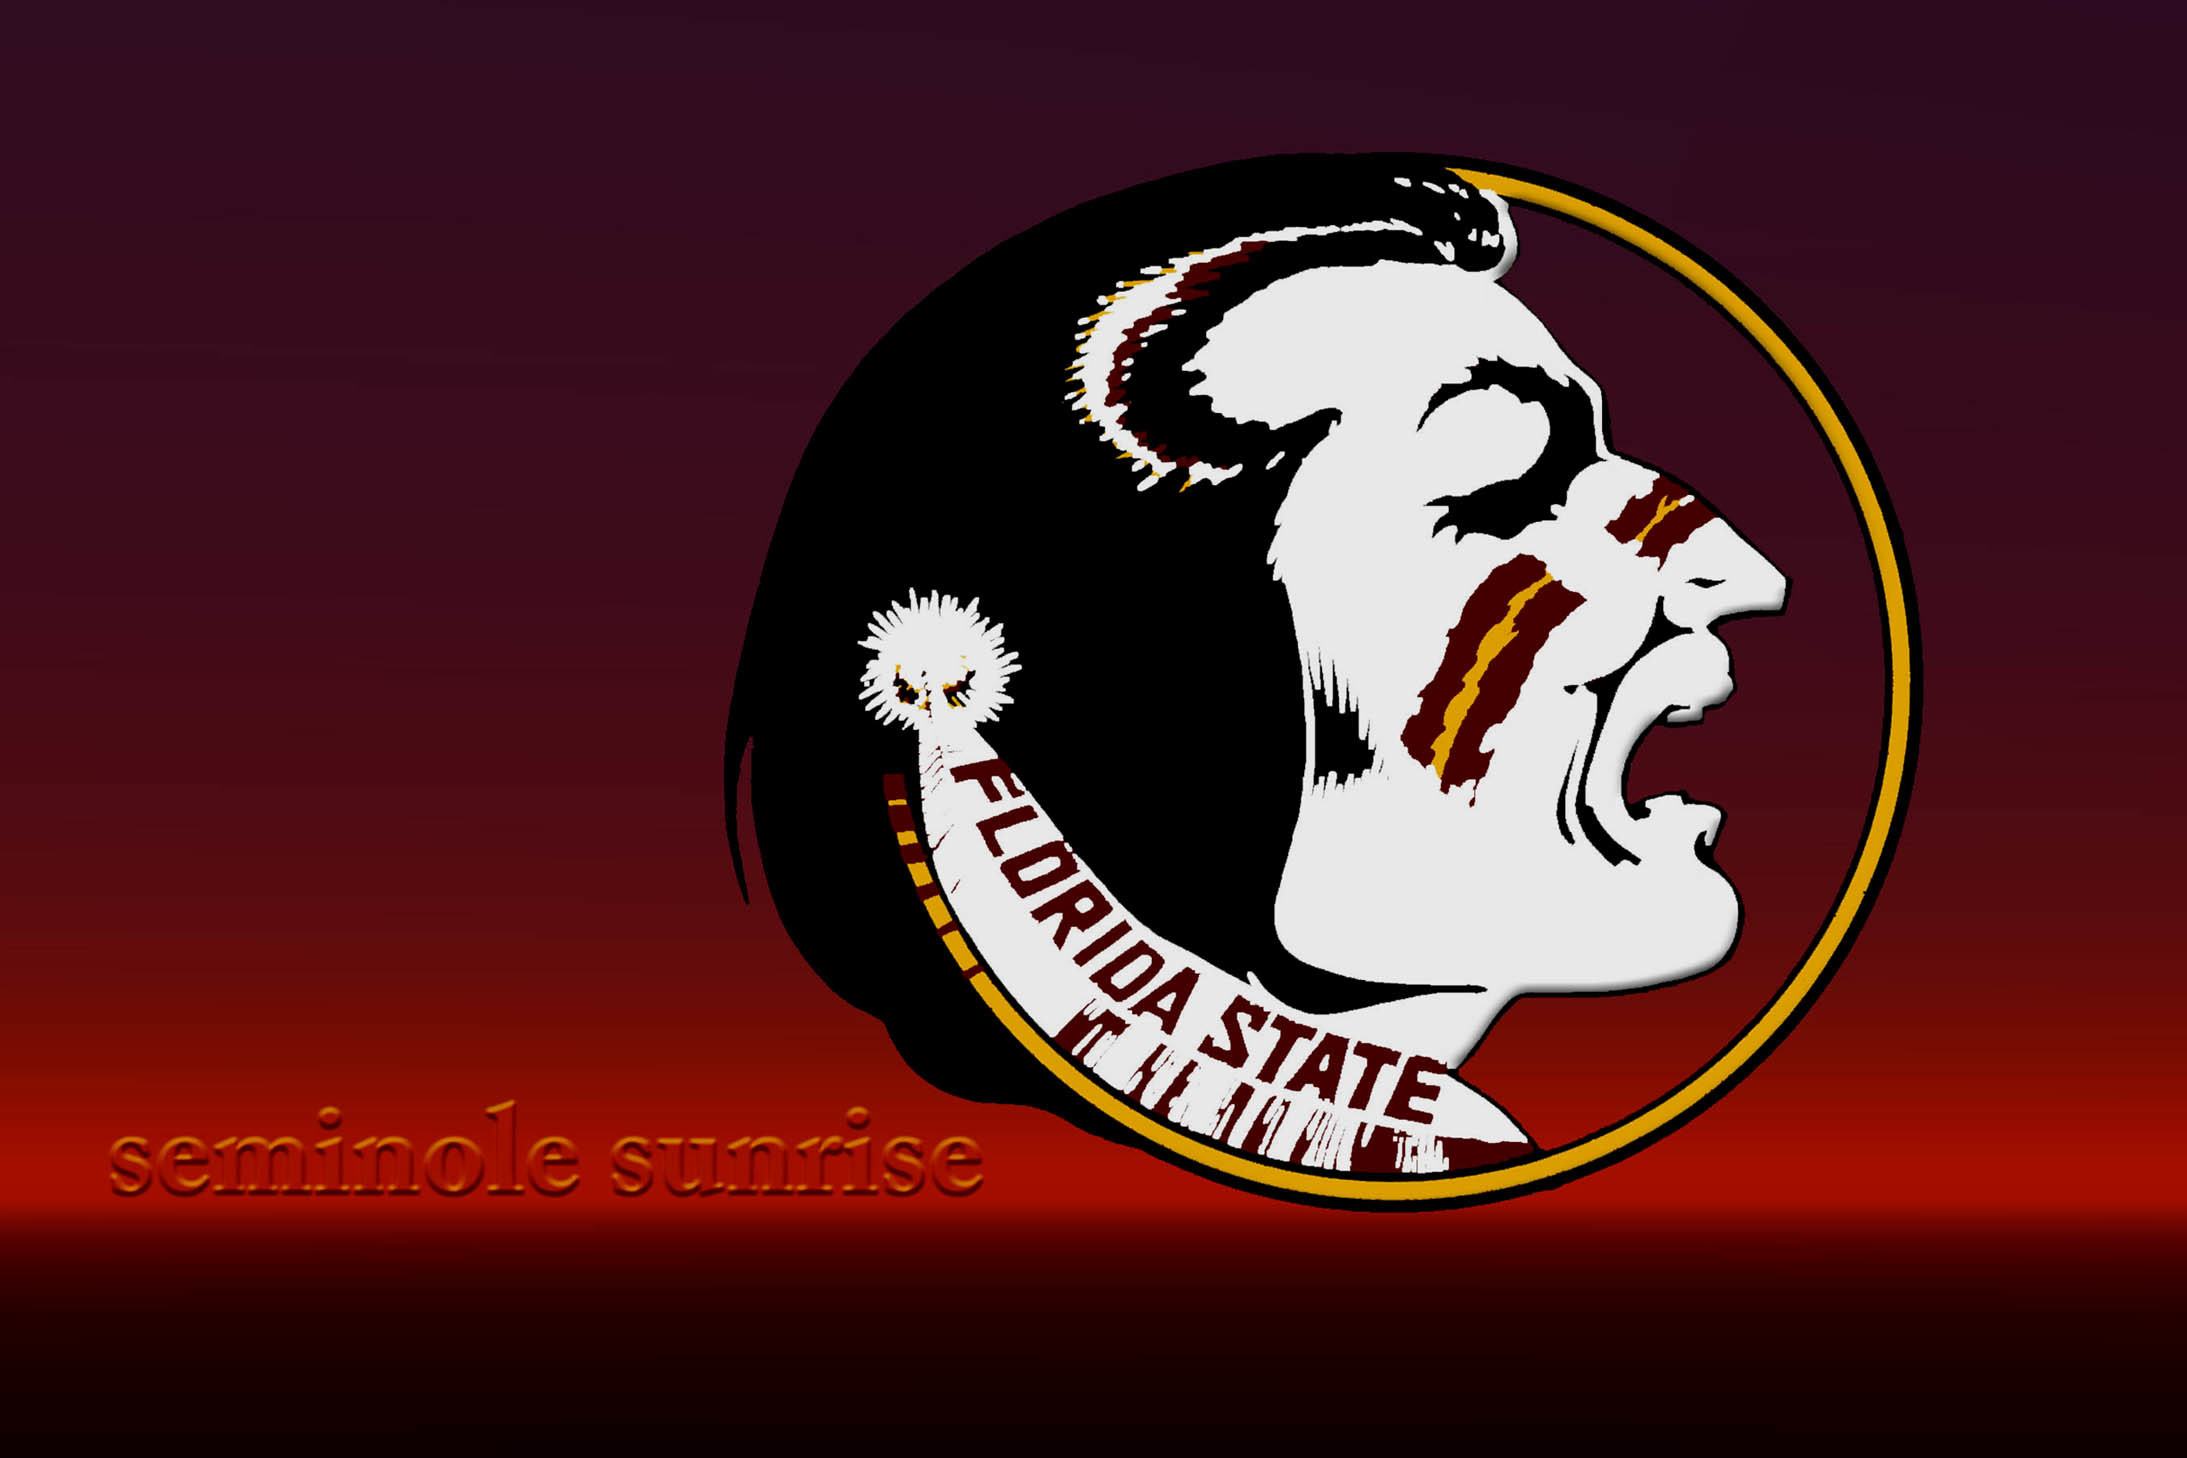 2187x1458 Florida State Wallpapers For Desktop.